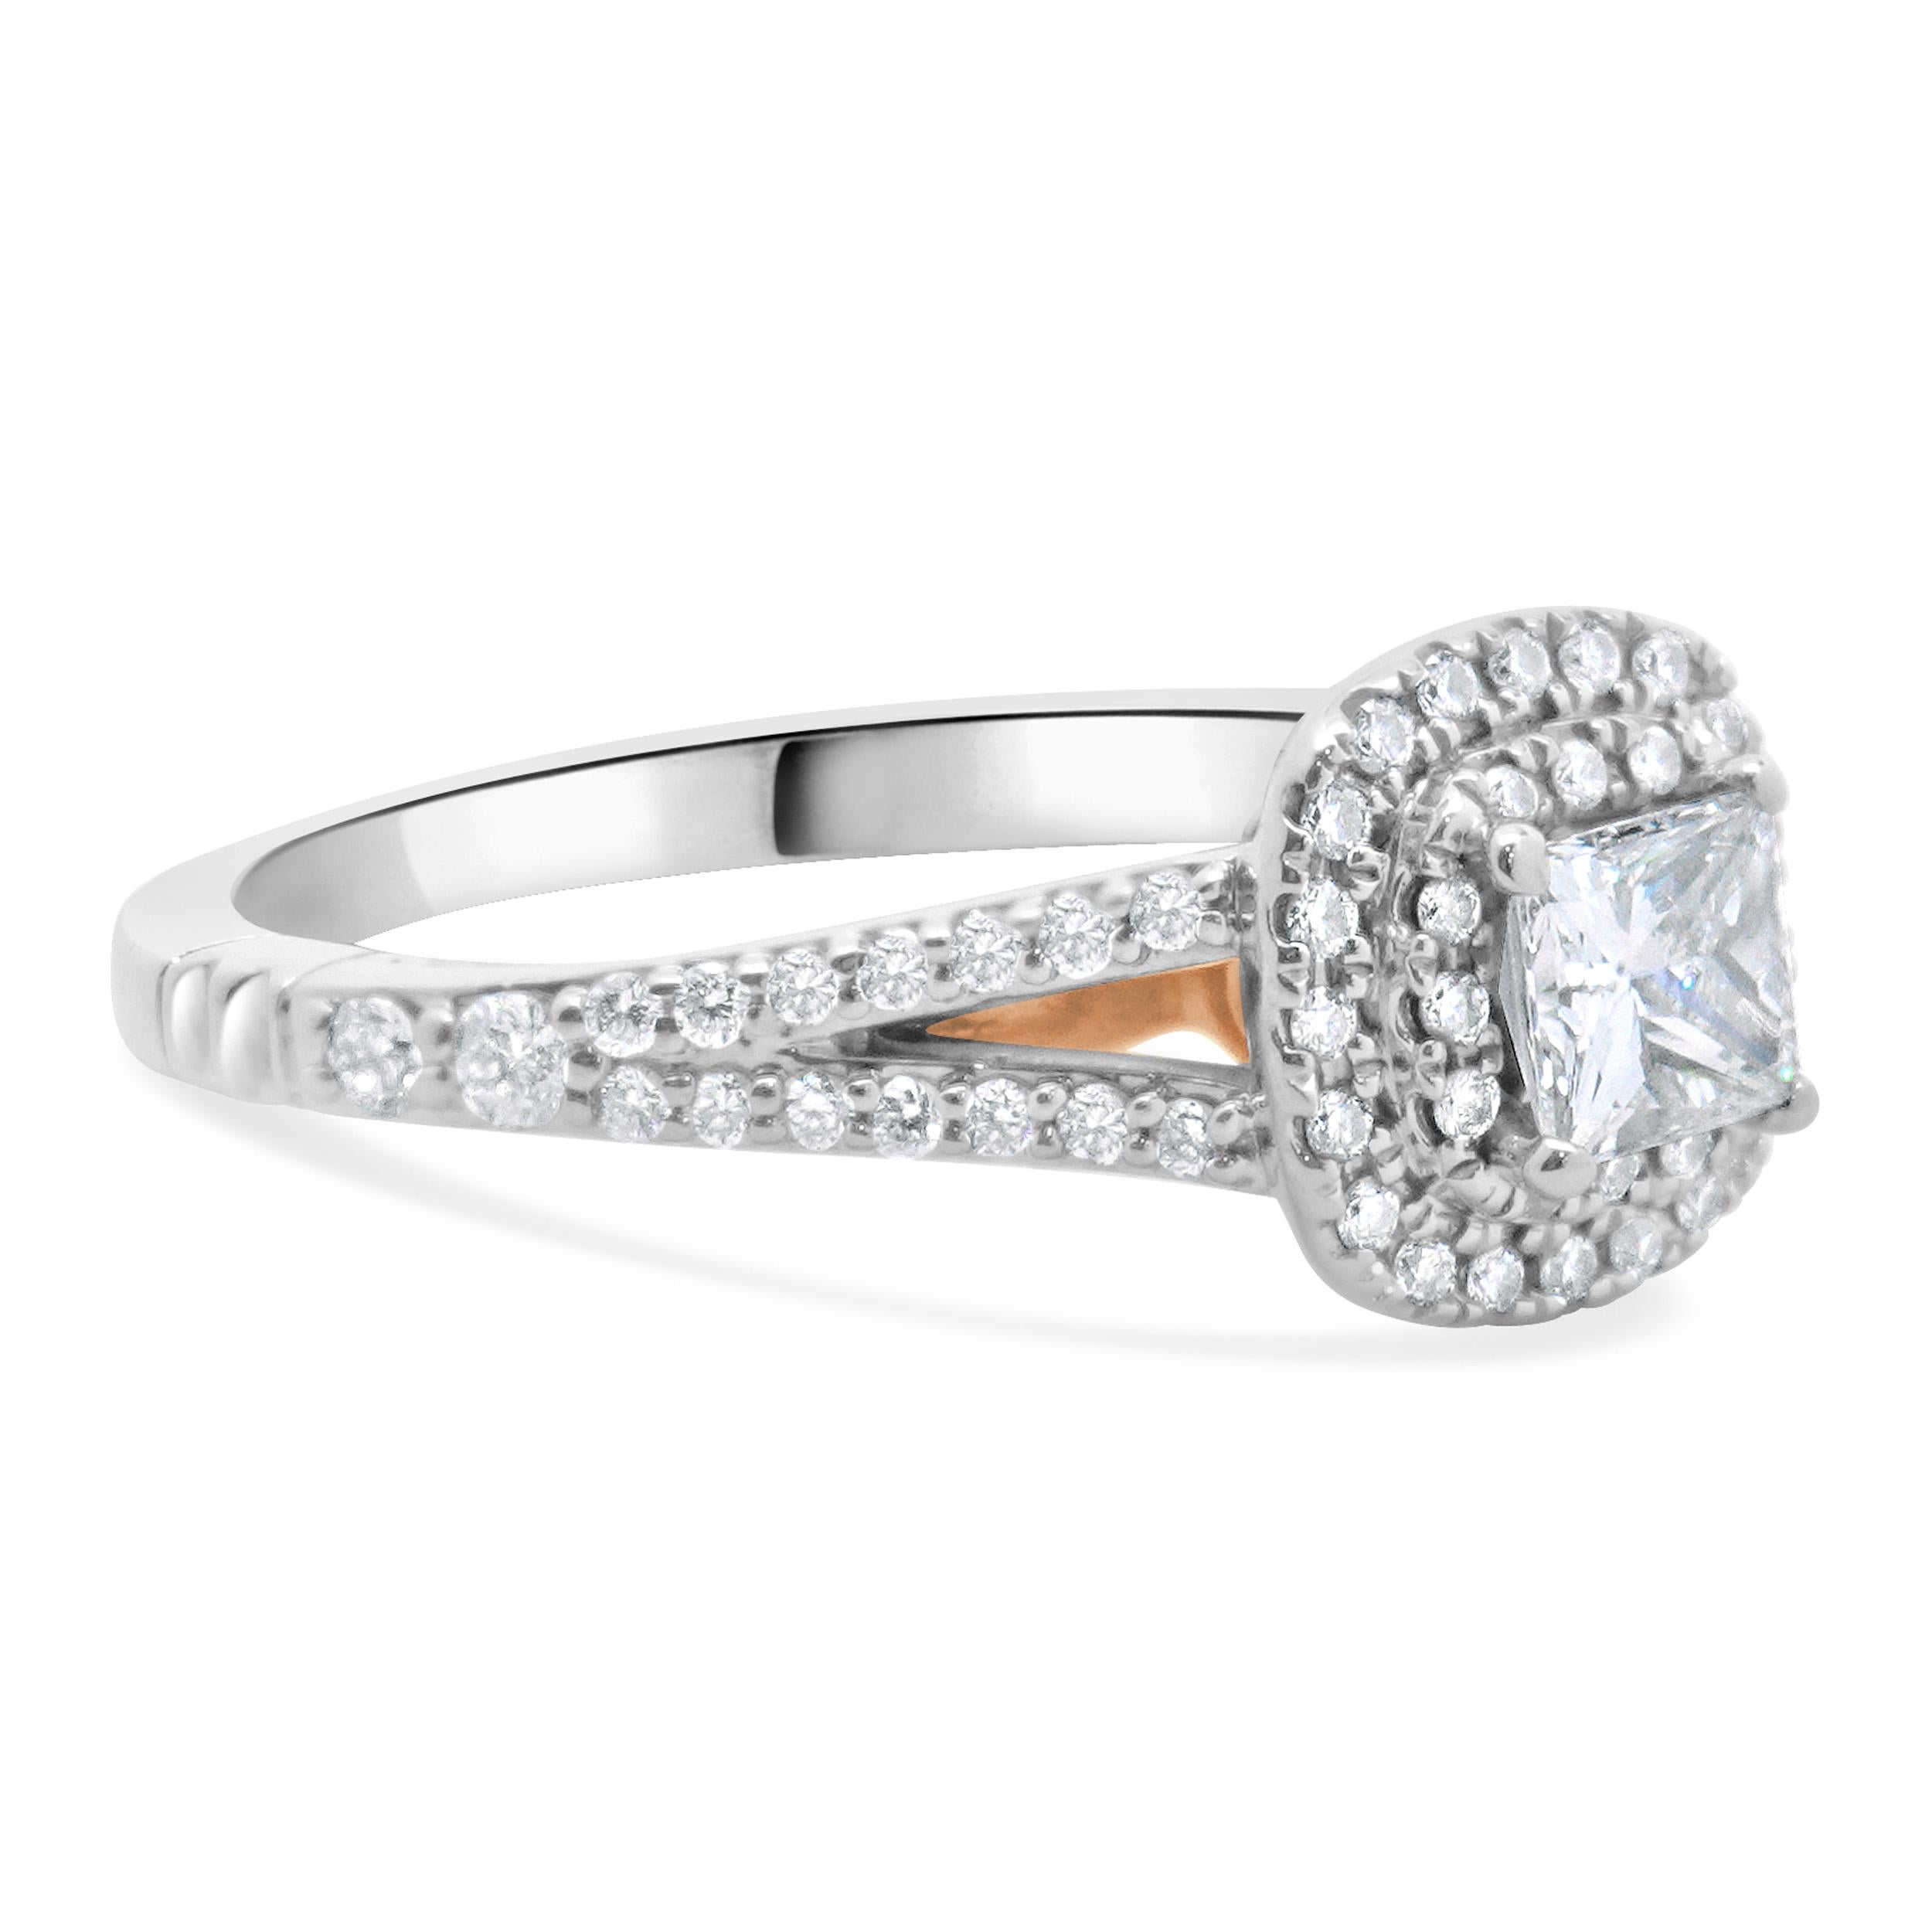 Disney “Rose” 14 Karat White Gold Diamond Engagement Ring In Excellent Condition For Sale In Scottsdale, AZ